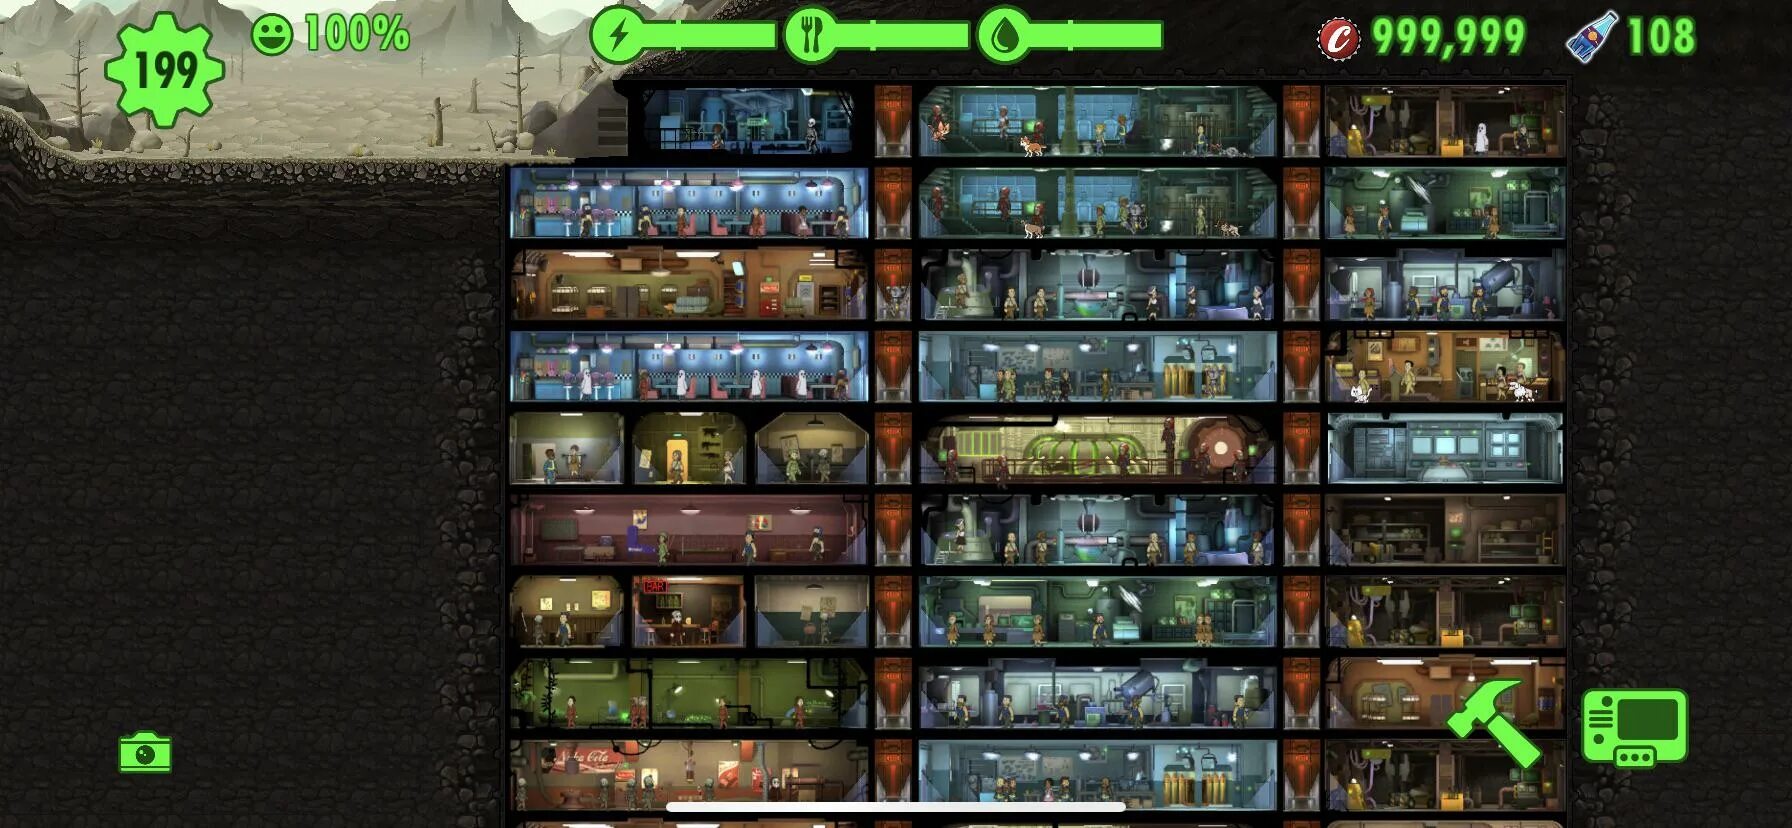 Fallout shelter ланч. Fallout Shelter best Layout. Fallout Shelter карта. Fallout Shelter Base Design. Ласт шелтер таблица героев.